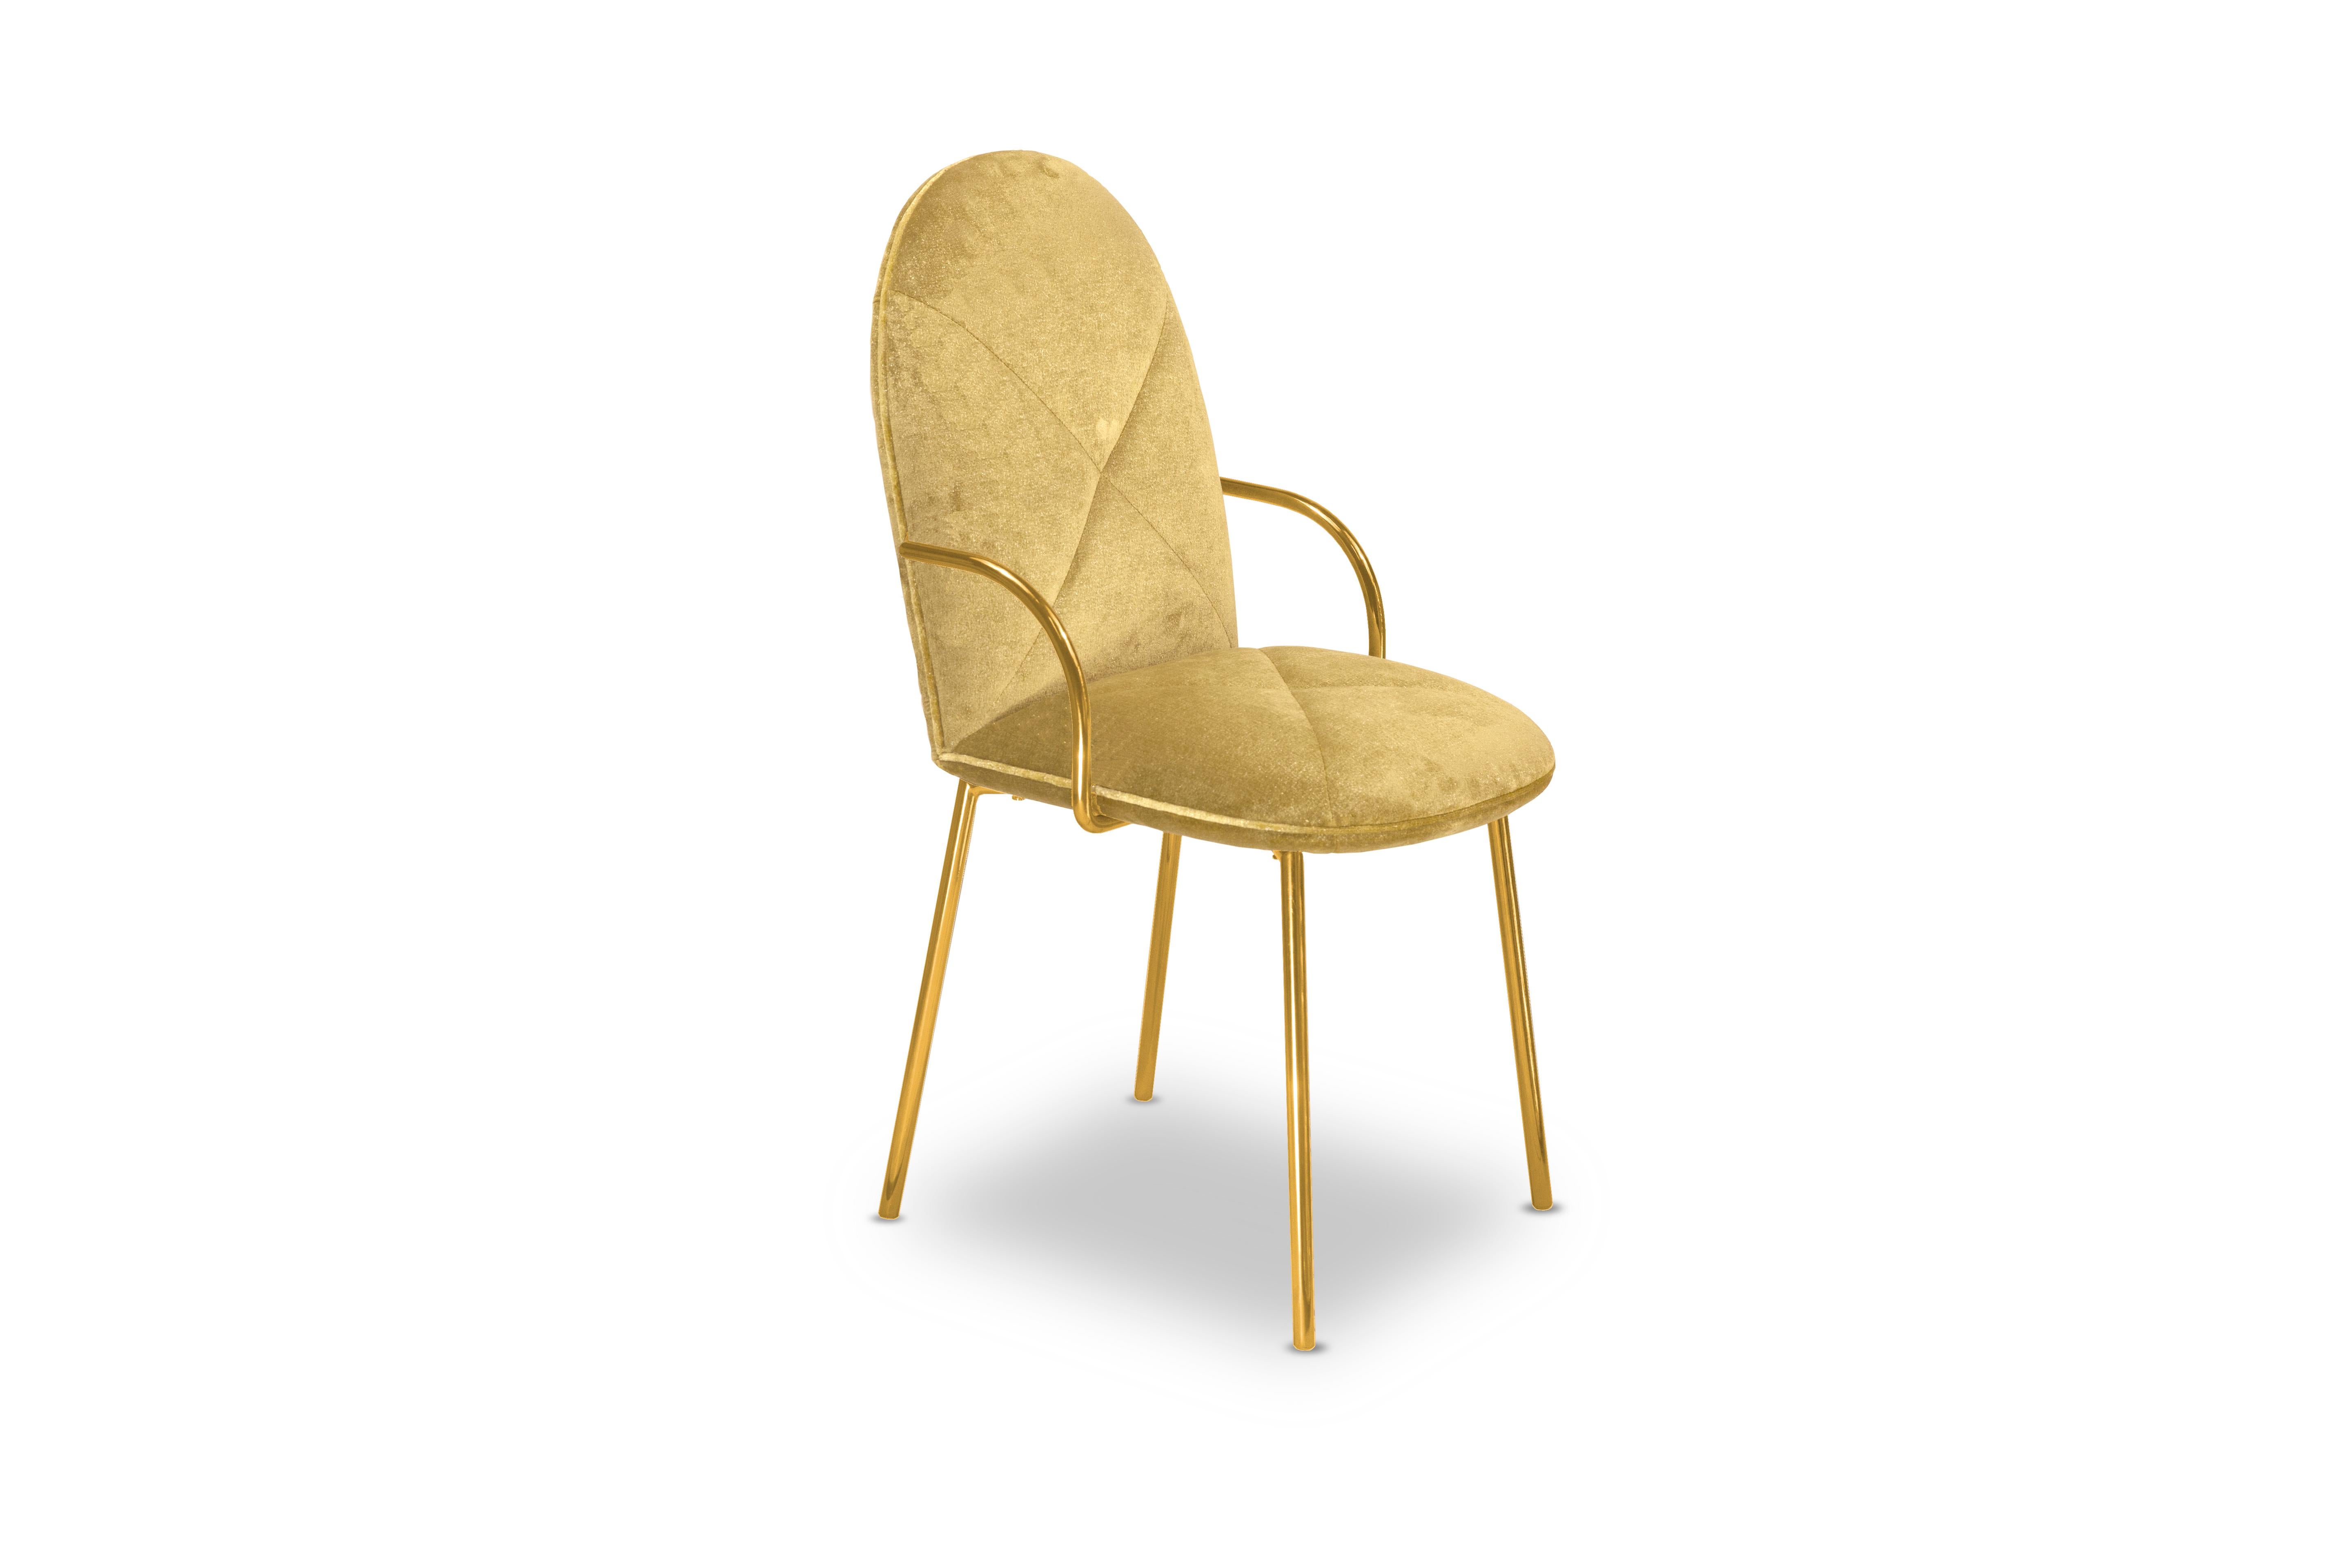 Orion Dining Chair with Gold Dedar Velvet and Gold Arms by Nika Zupanc is a beautiful chair with opulent gold fabric from Dedar Milano and gold metal arms.

Nika Zupanc, a strikingly renowned Slovenian designer, never shies away from redefining the